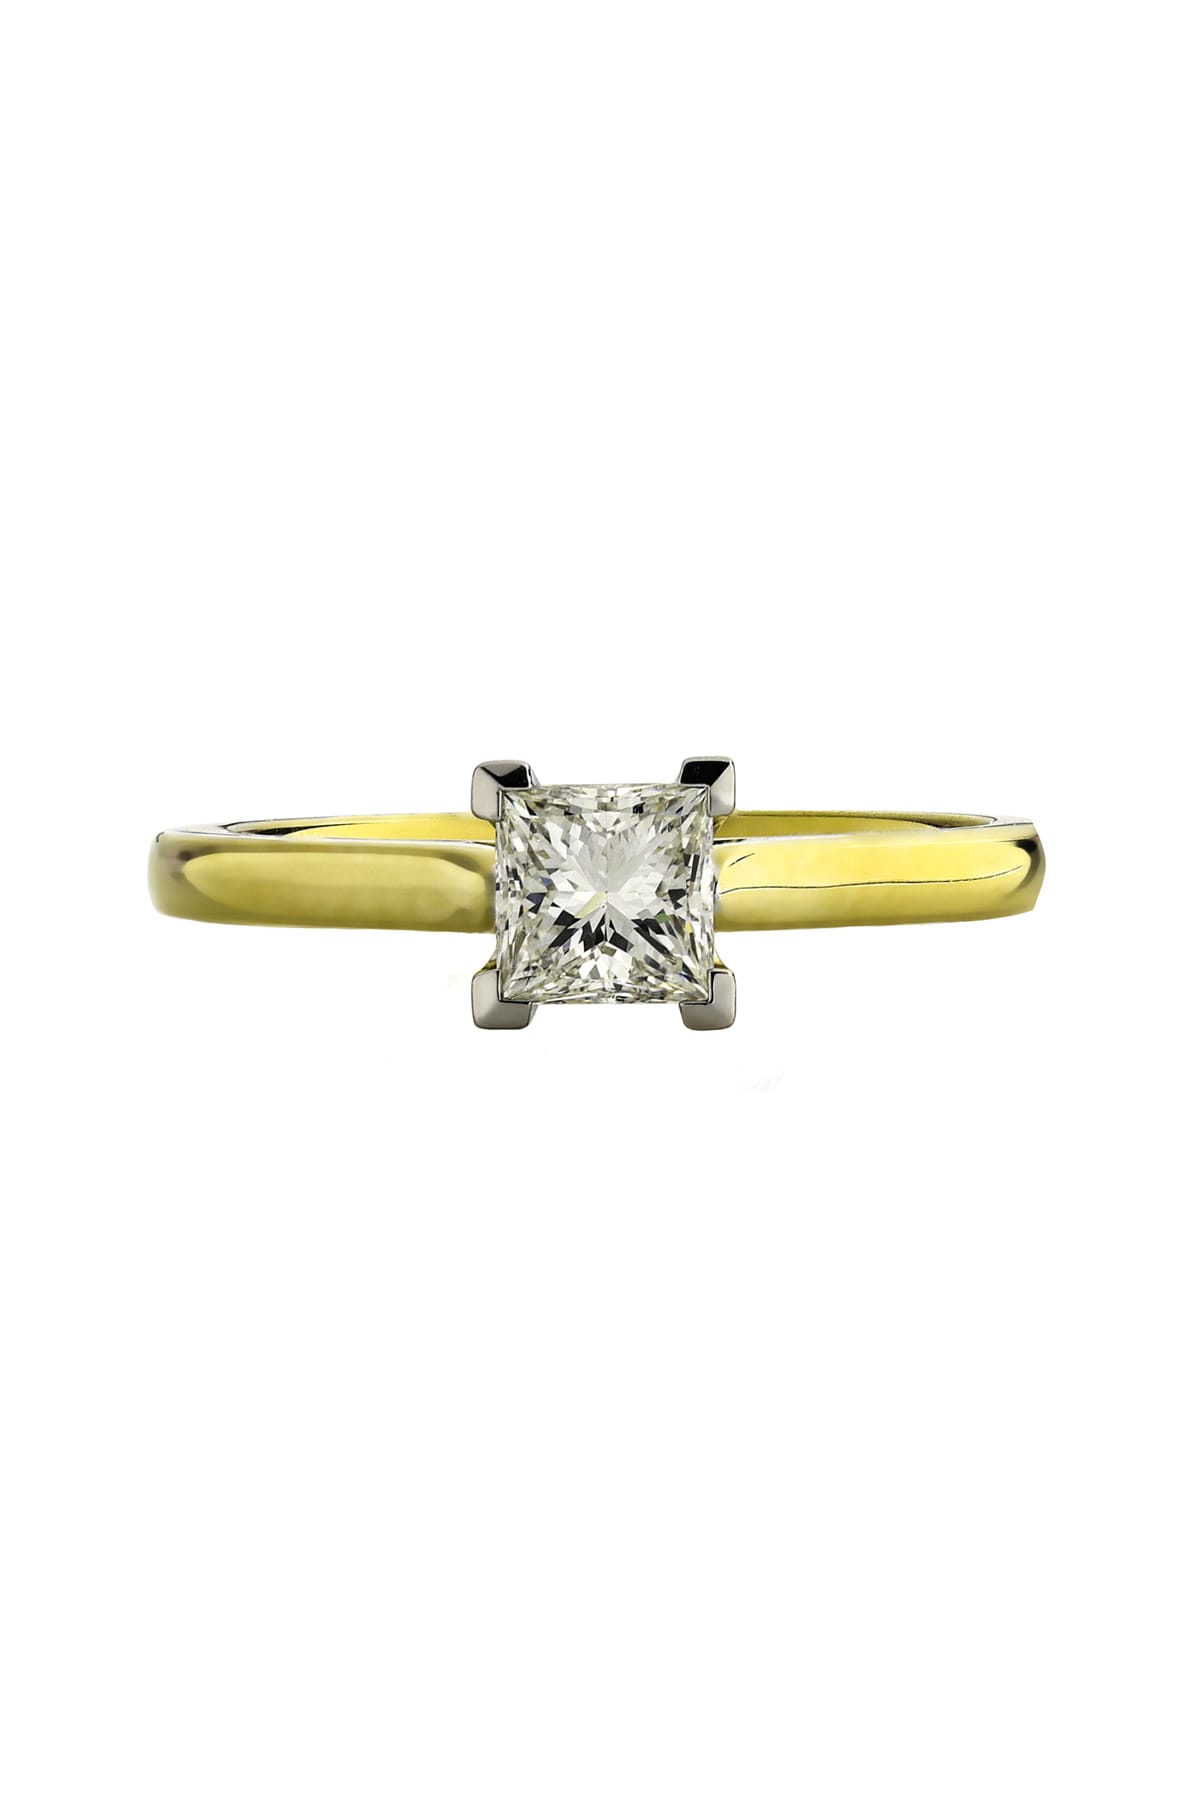 18 Carat Gold With 0.70 Carat Princess Cut Solitaire Engagement Ring available at LeGassick Diamonds and Jewellery Gold Coast, Australia.